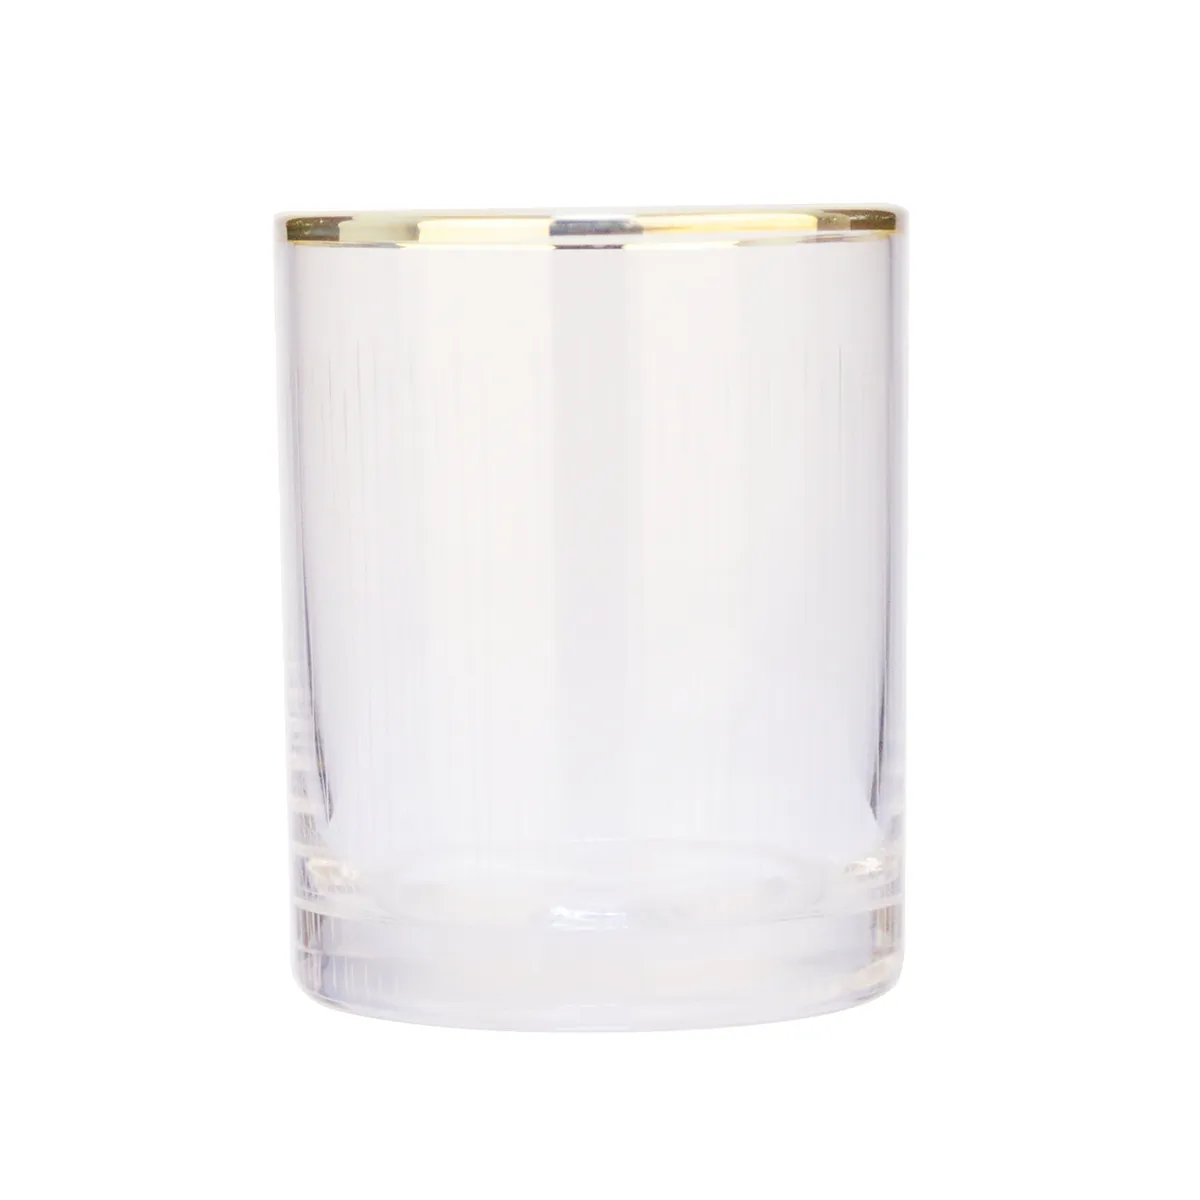 OEM Gold Rimmed Crystal Old Fashioned Tumbler Whiskey Glass Cup